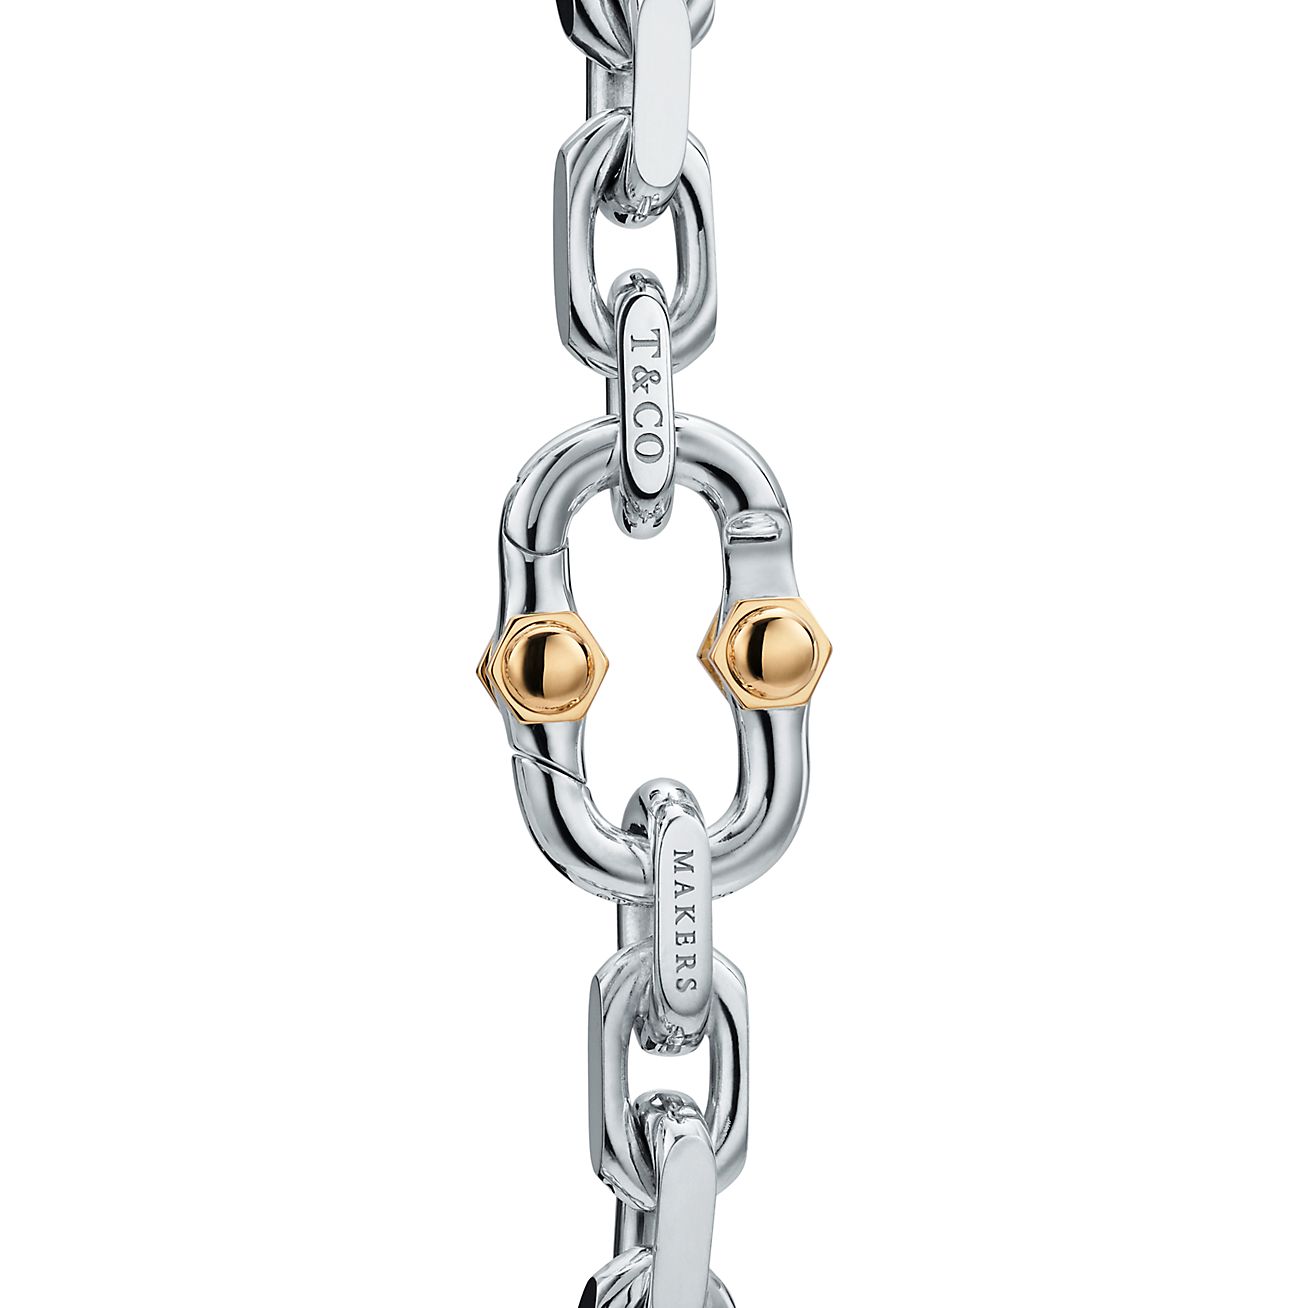 Tiffany 1837 Makers Wide Chain Bracelet in Sterling Silver and Gold, Medium